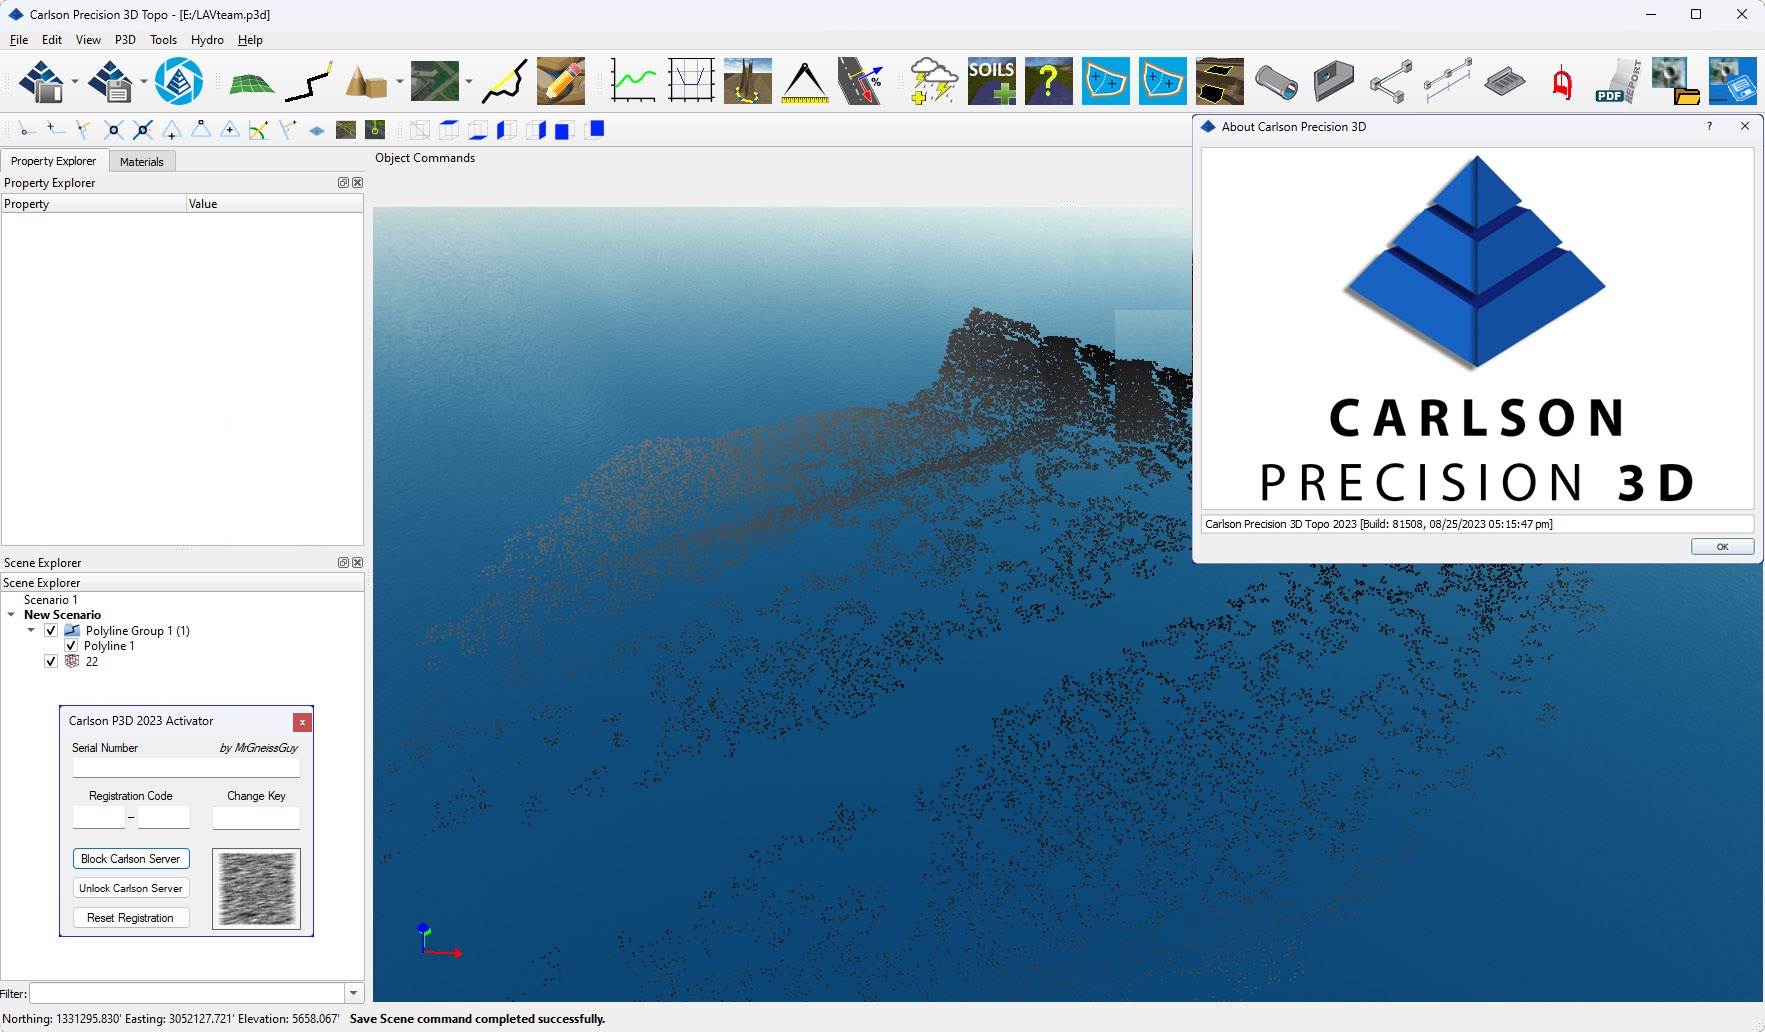 Working with Carlson Precision 3D Topo 2023 build 81058 full